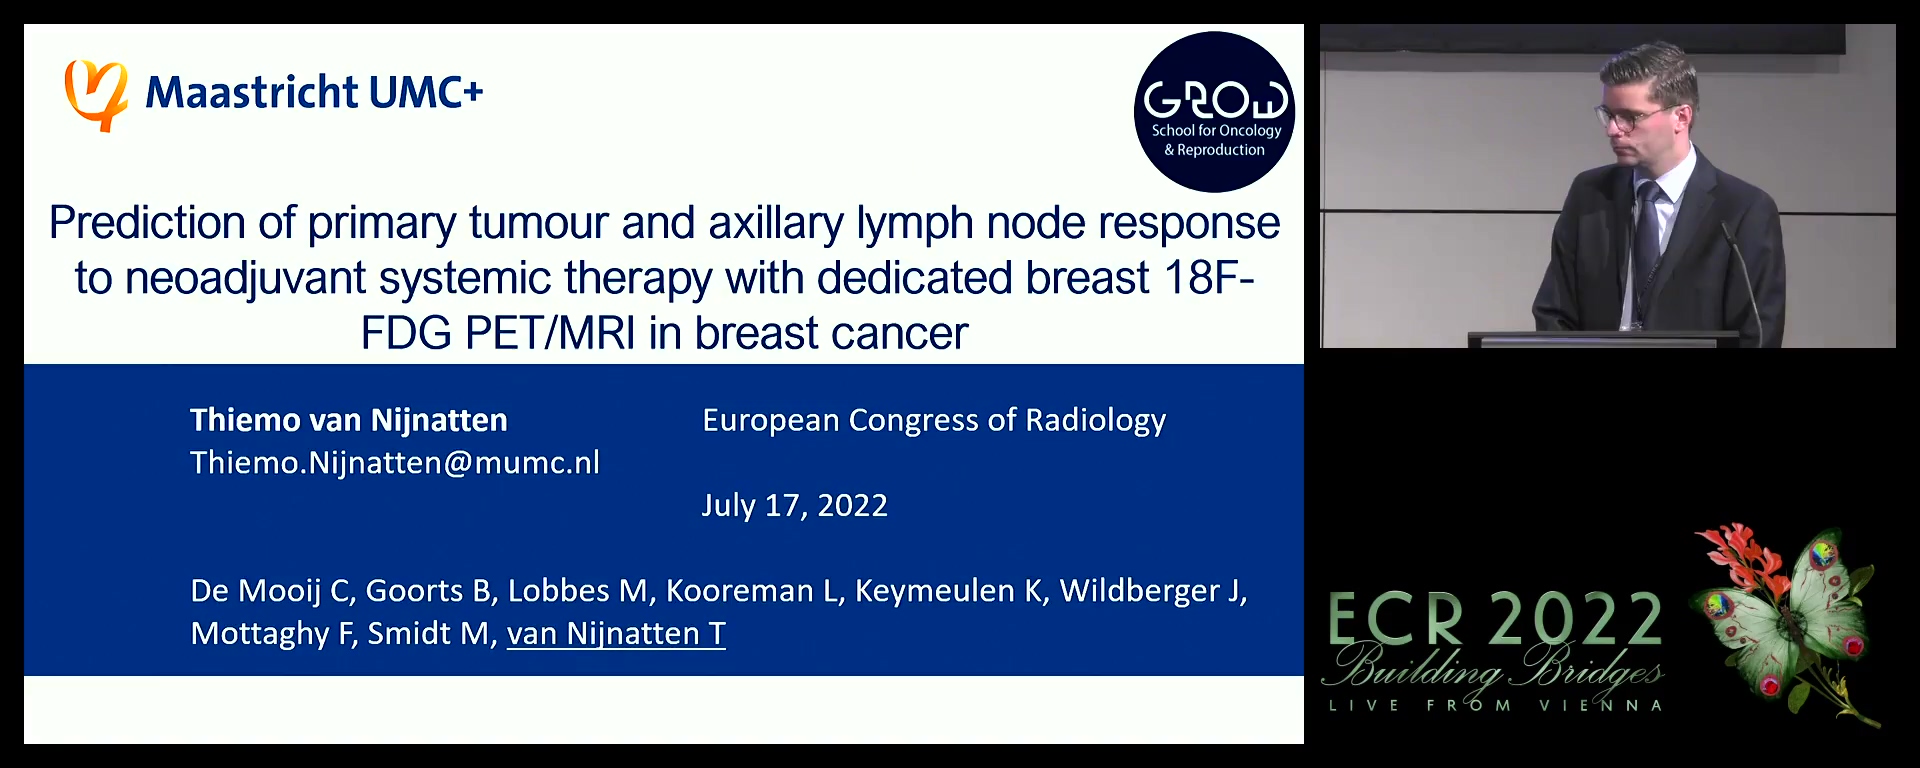 Prediction of primary tumour and axillary lymph node response to neoadjuvant systemic therapy with dedicated breast 18F-FDG PET/MRI in breast cancer